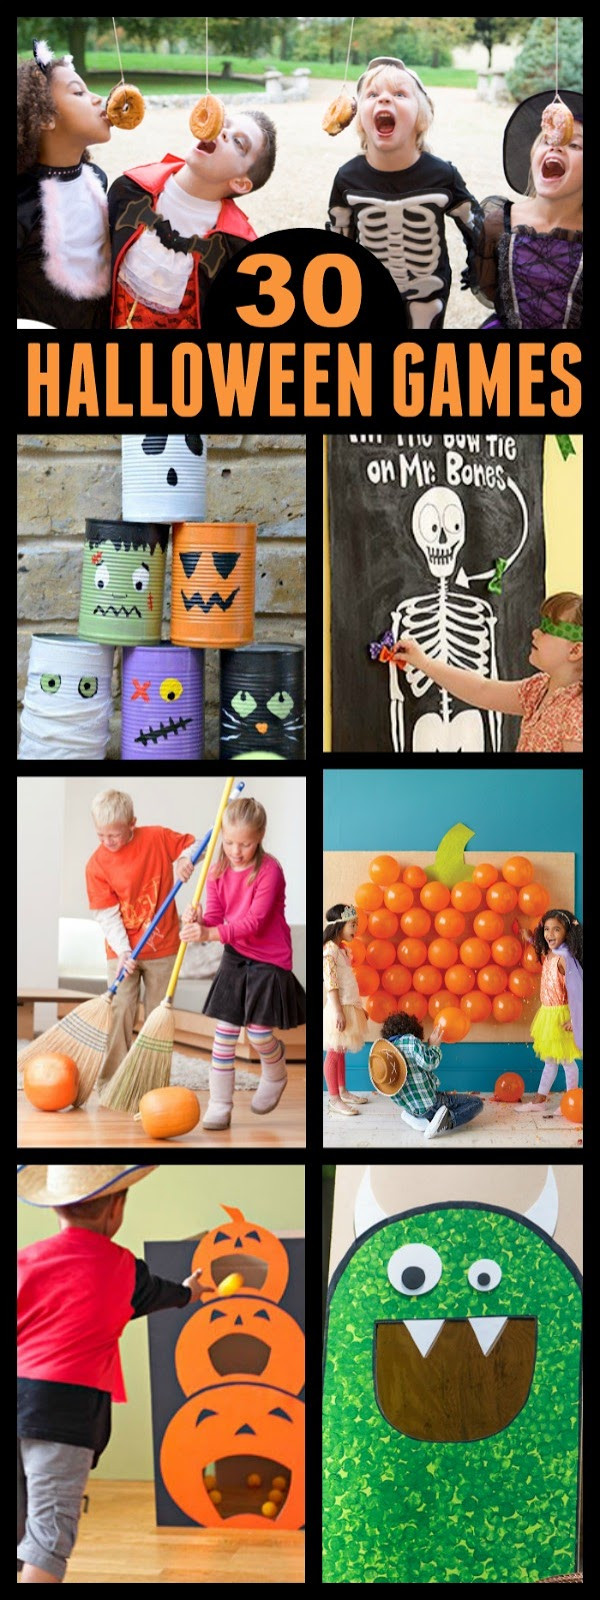 Halloween Party Games Ideas For Kids
 Halloween Games for Kids